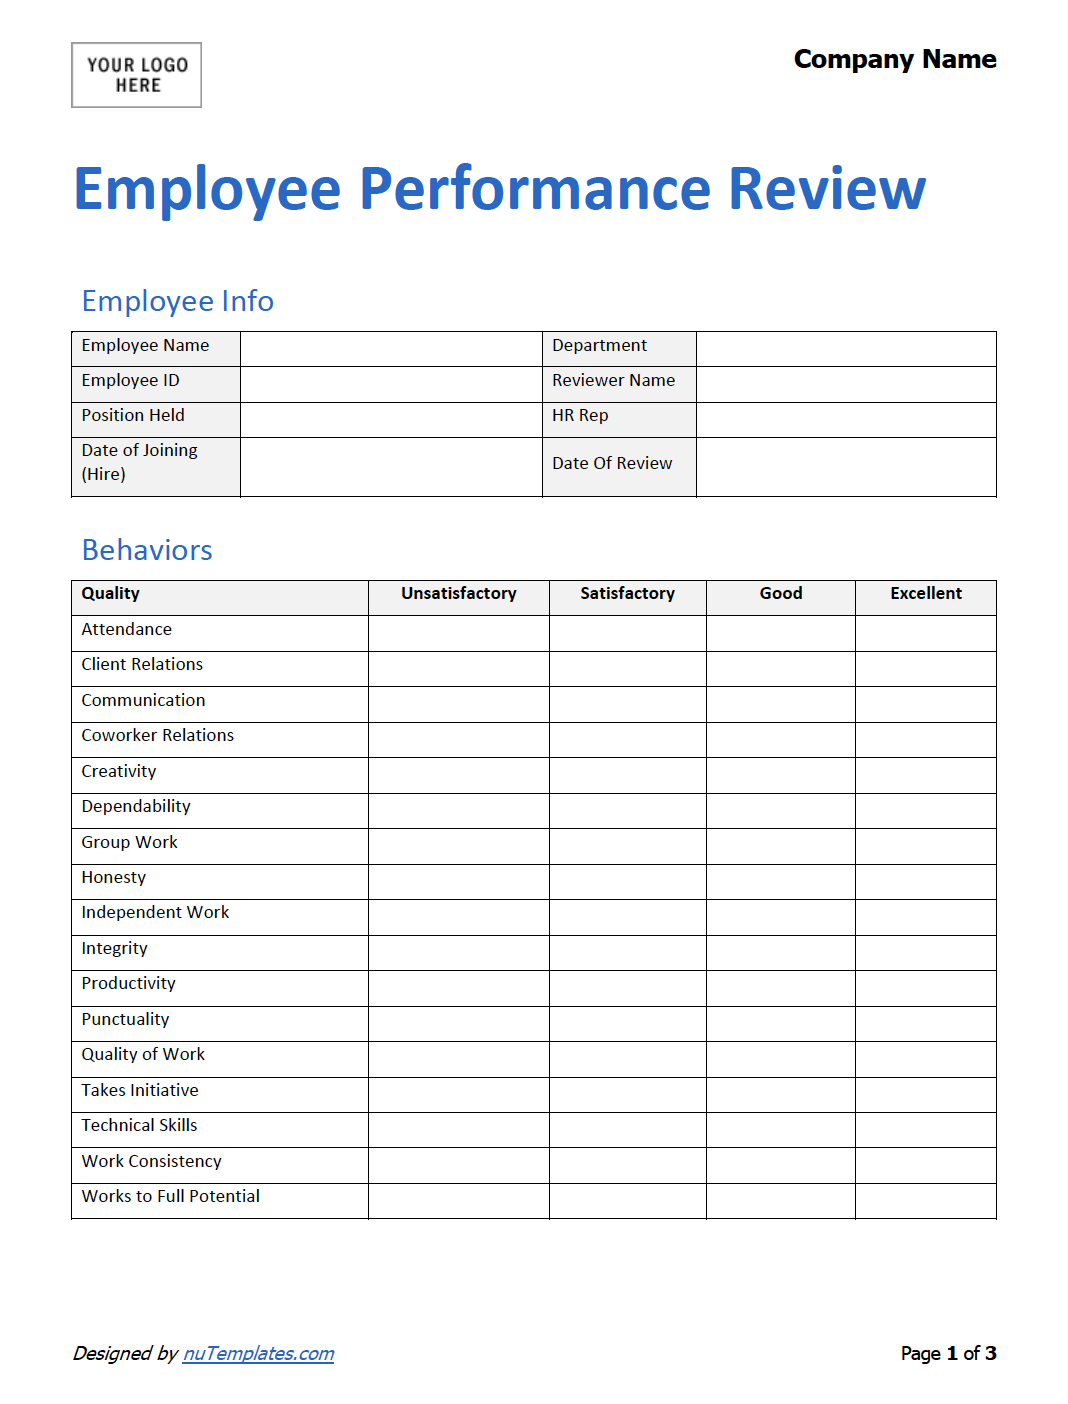 employee-performance-review-forms-free-printable